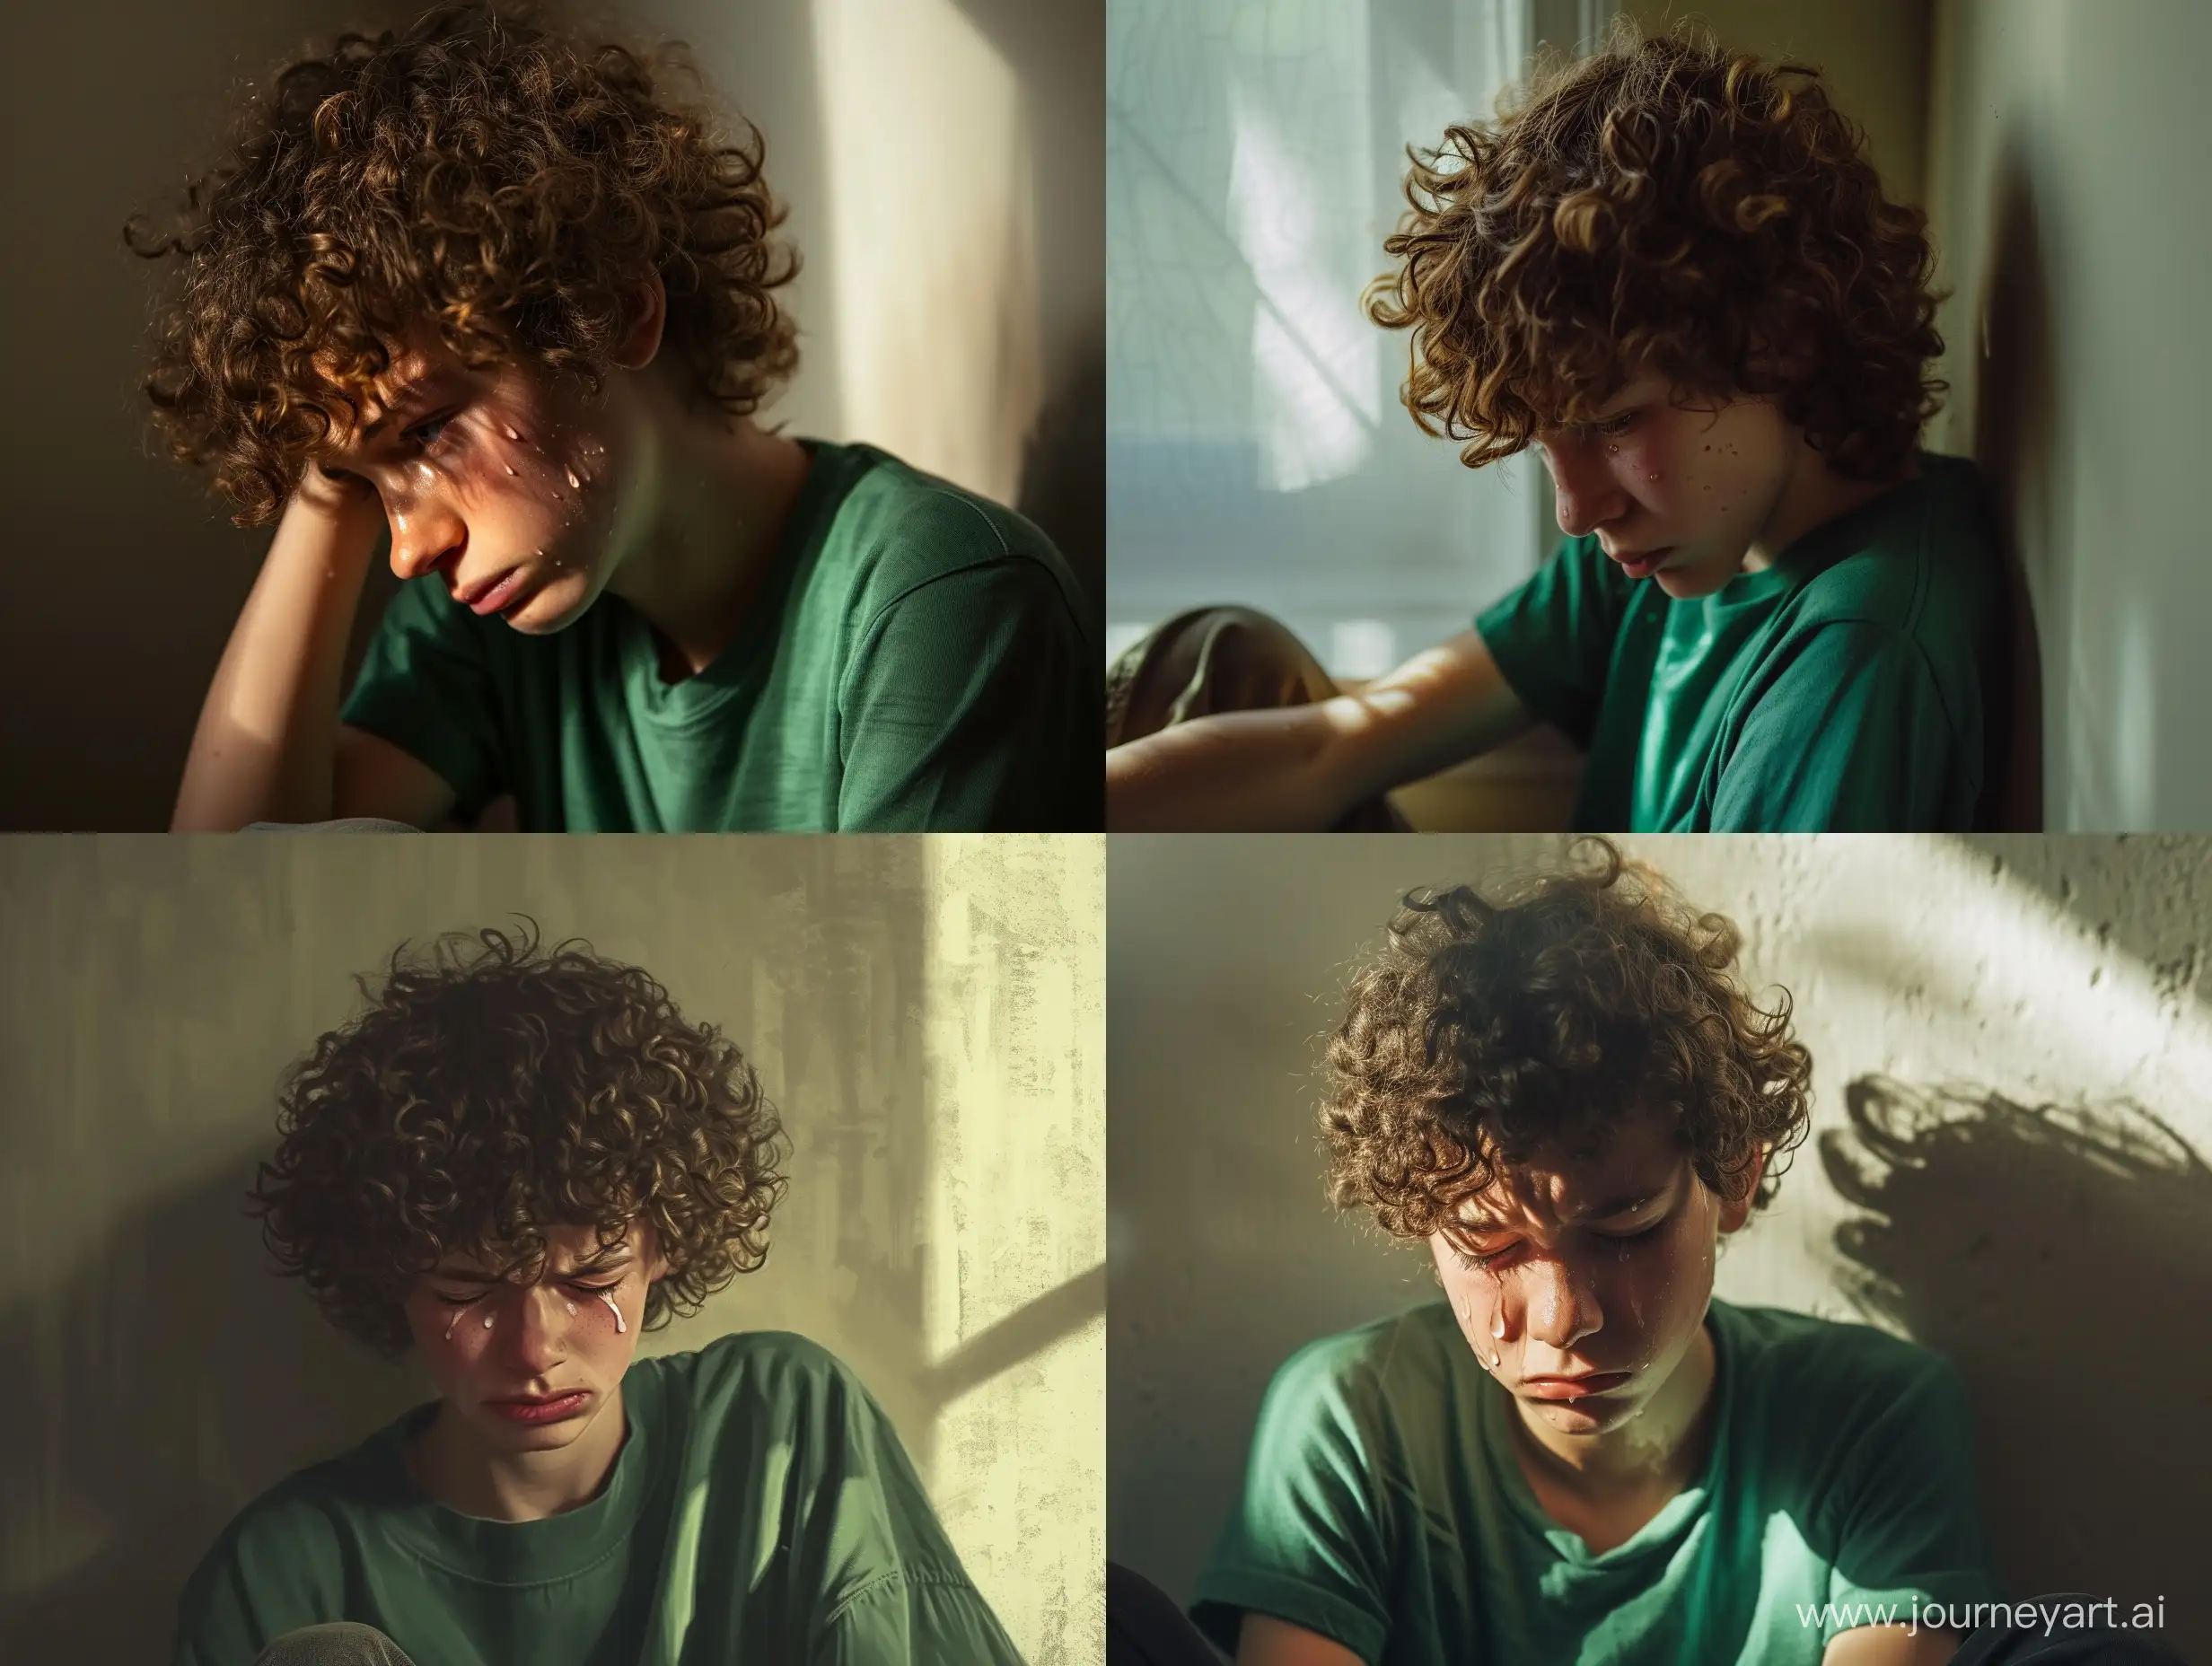 A curly-haired 16-year-old boy in a green shirt sits against the wall and cries. The scene is illuminated by soft light coming through the window and creates a shadow falling on his exhausted face. His curly hair frames his face, creating a touching image. The image must be rendered in high detail to convey every tear and wrinkle on his face.